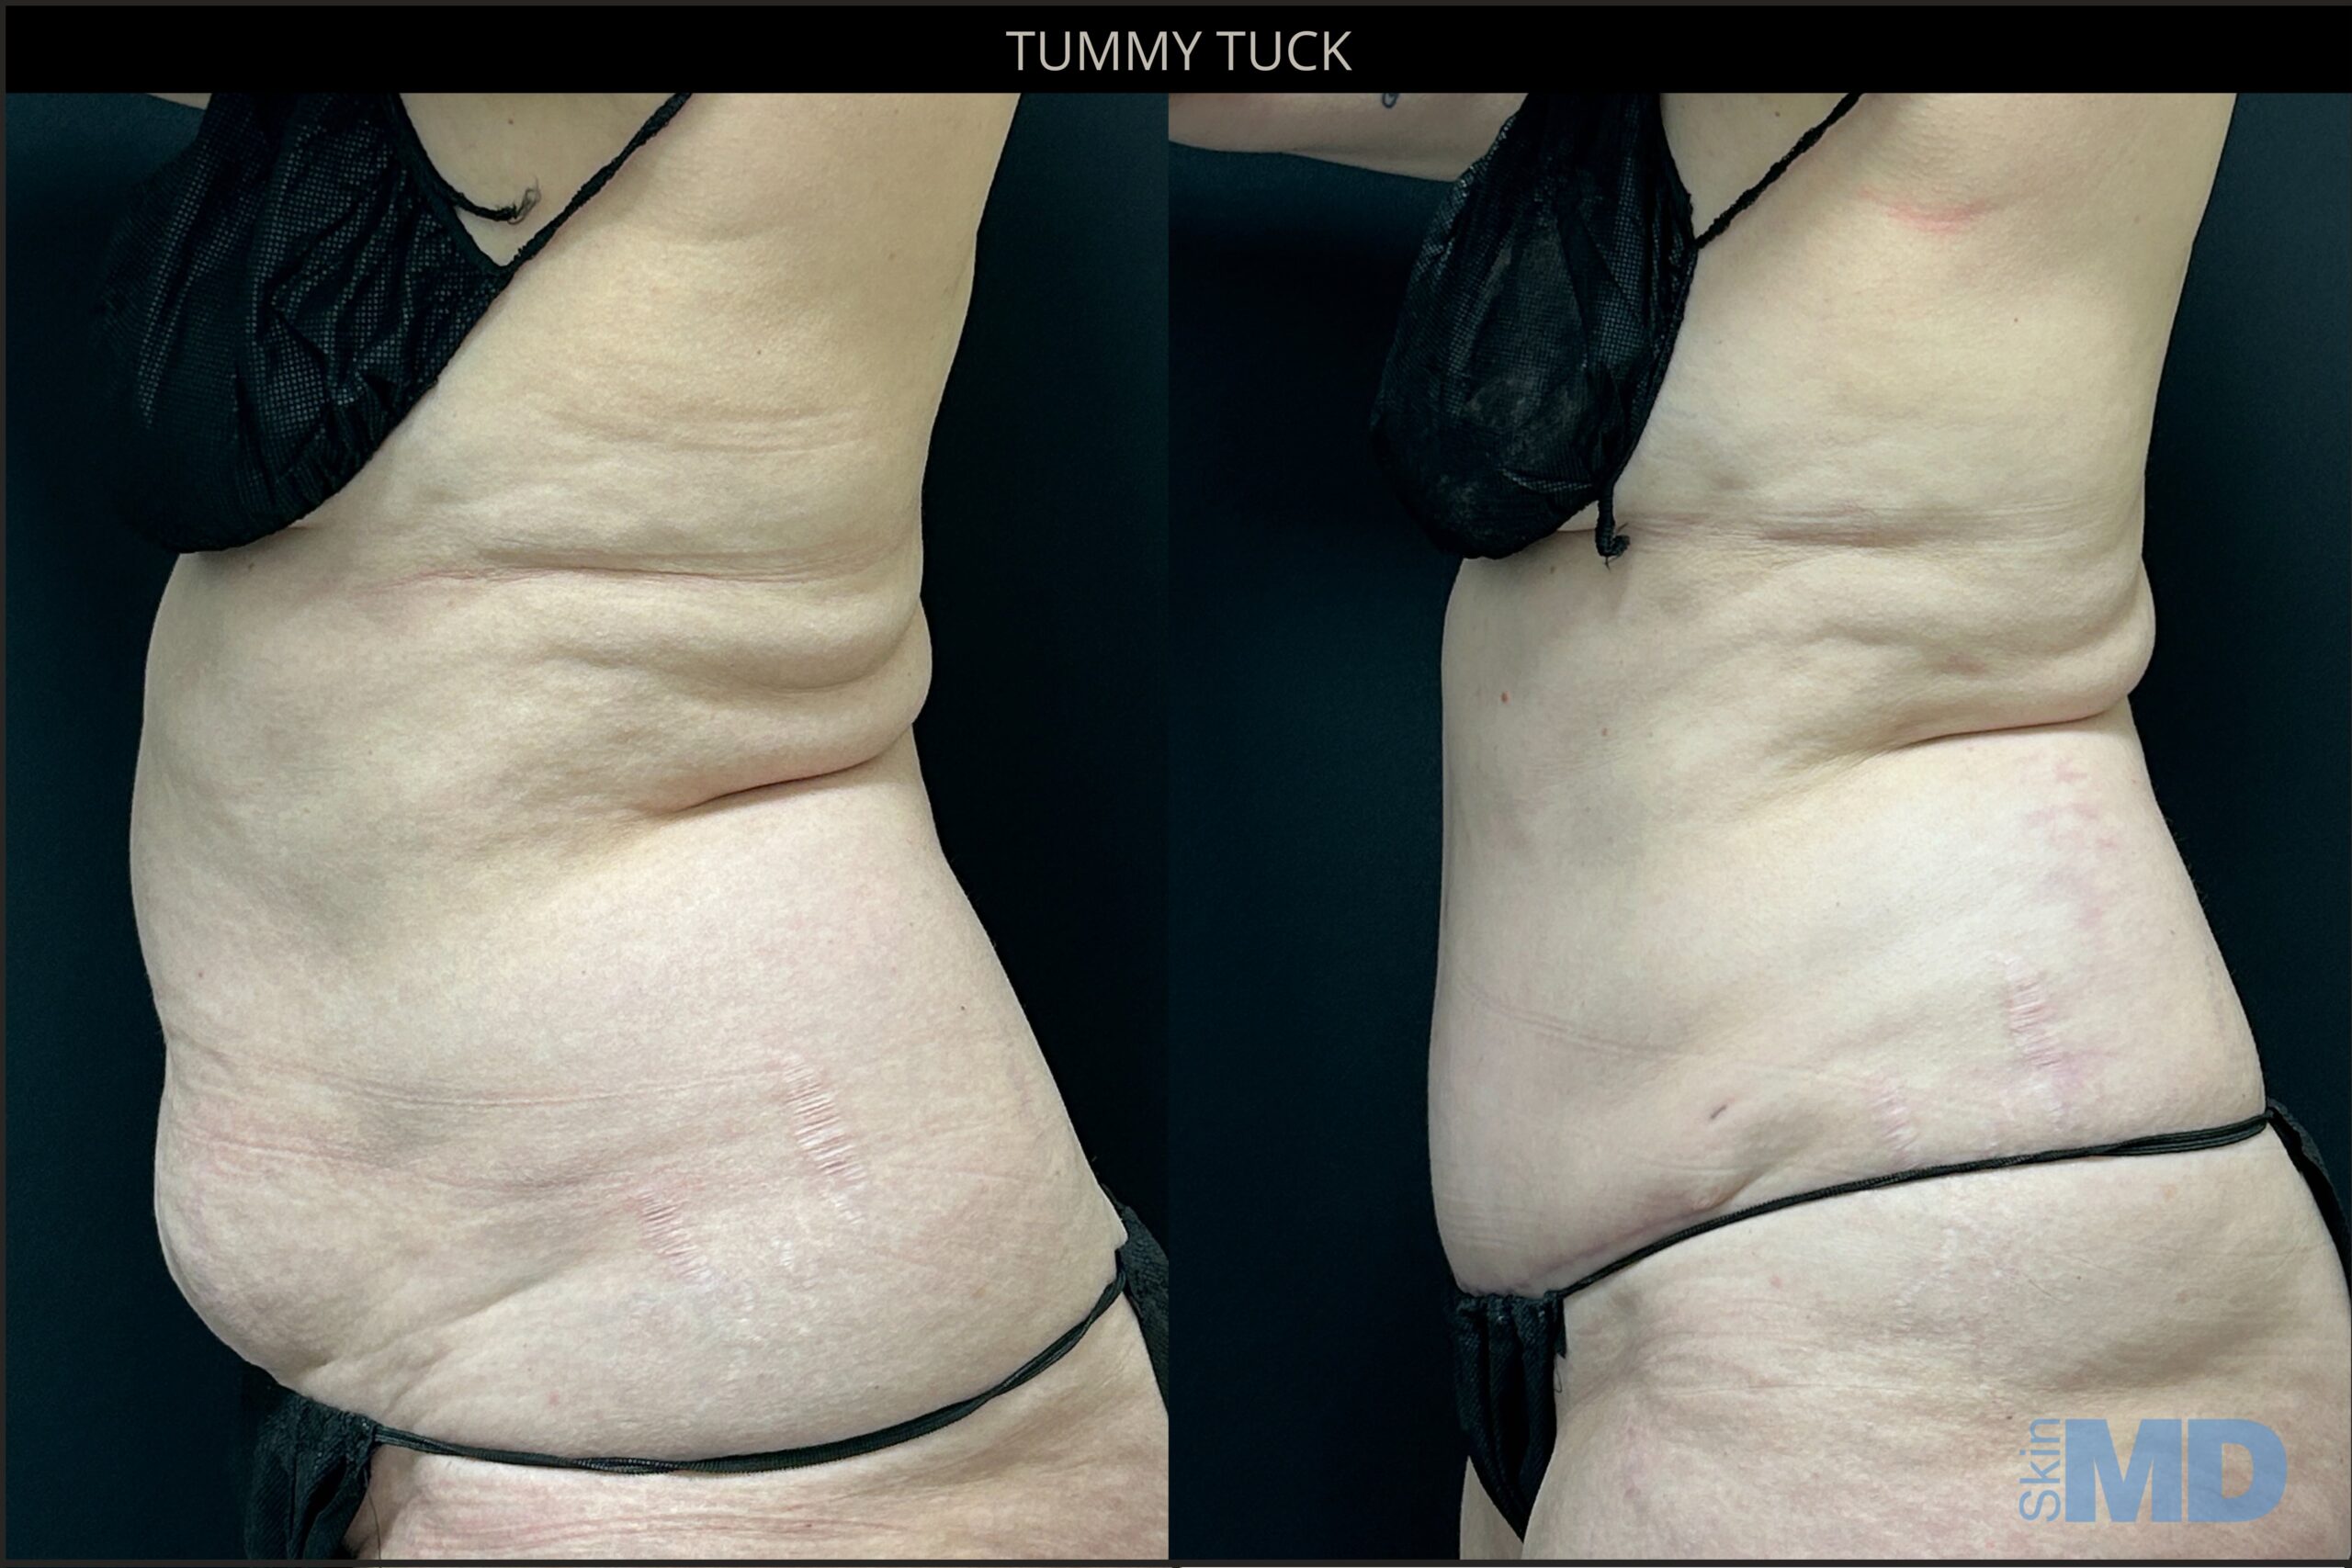 Before and after tummy tuck results